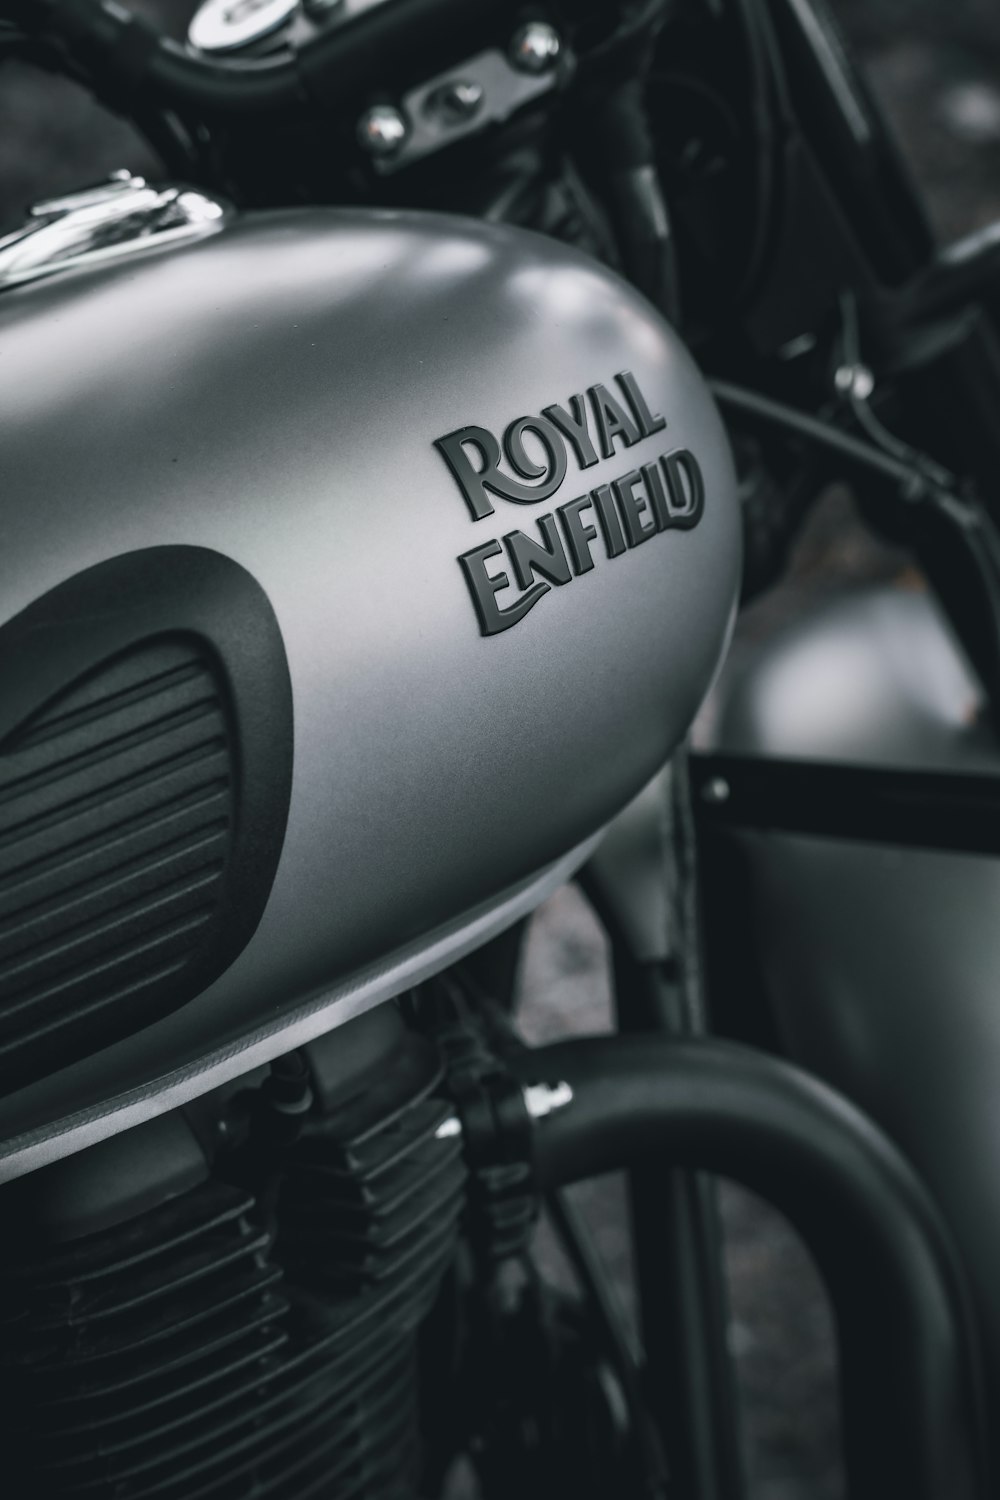 a close up of the royal enfield logo on a motorcycle